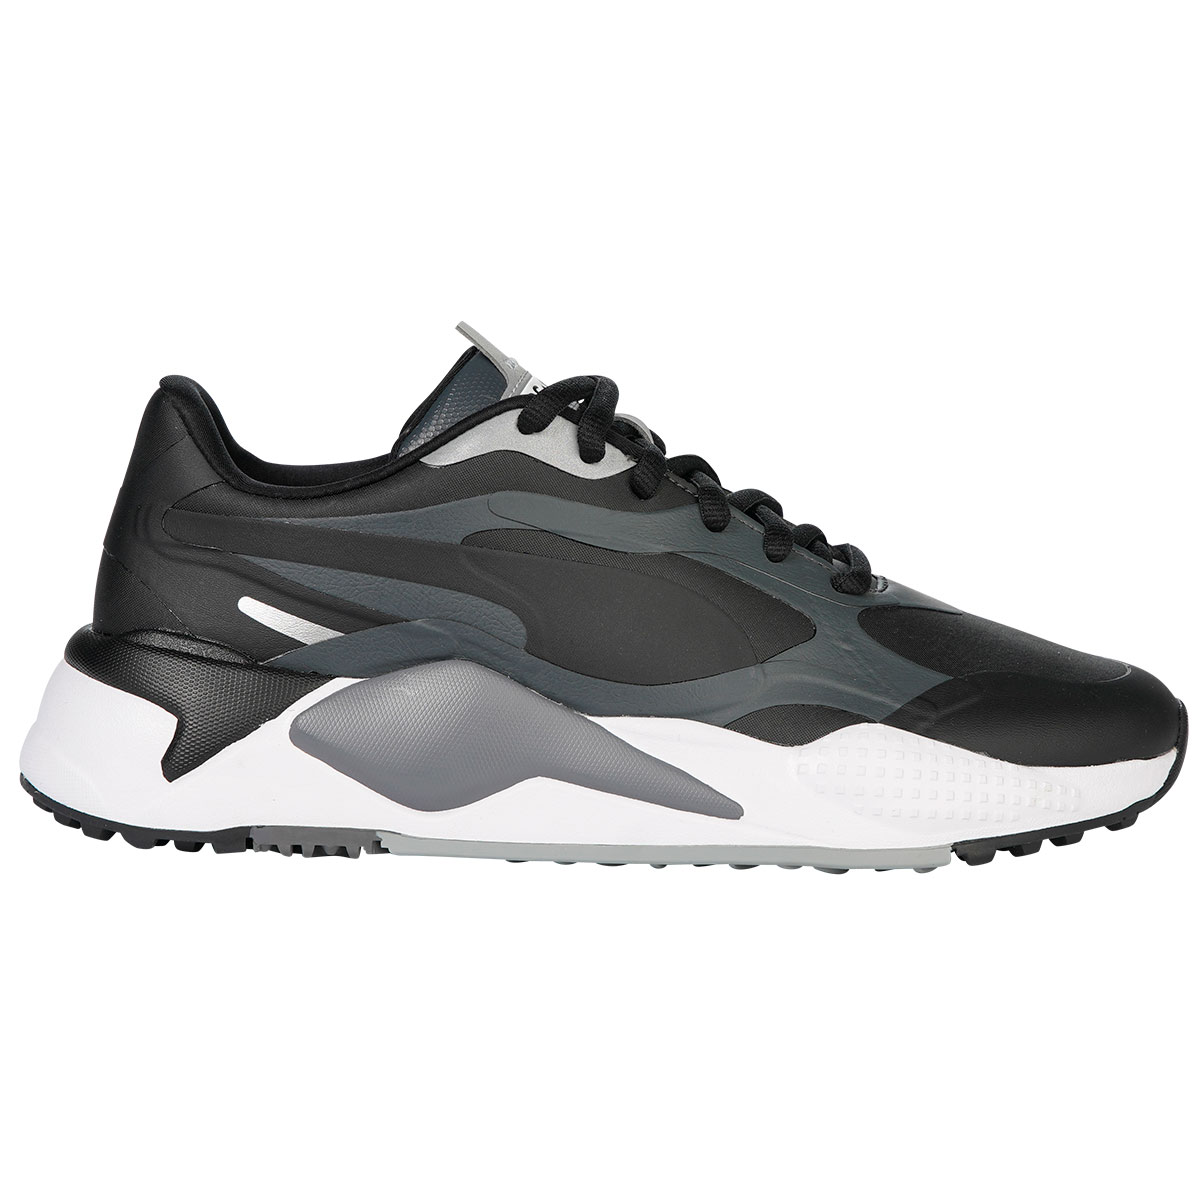 PUMA Men's RS-G Waterproof Golf Shoes from american golf